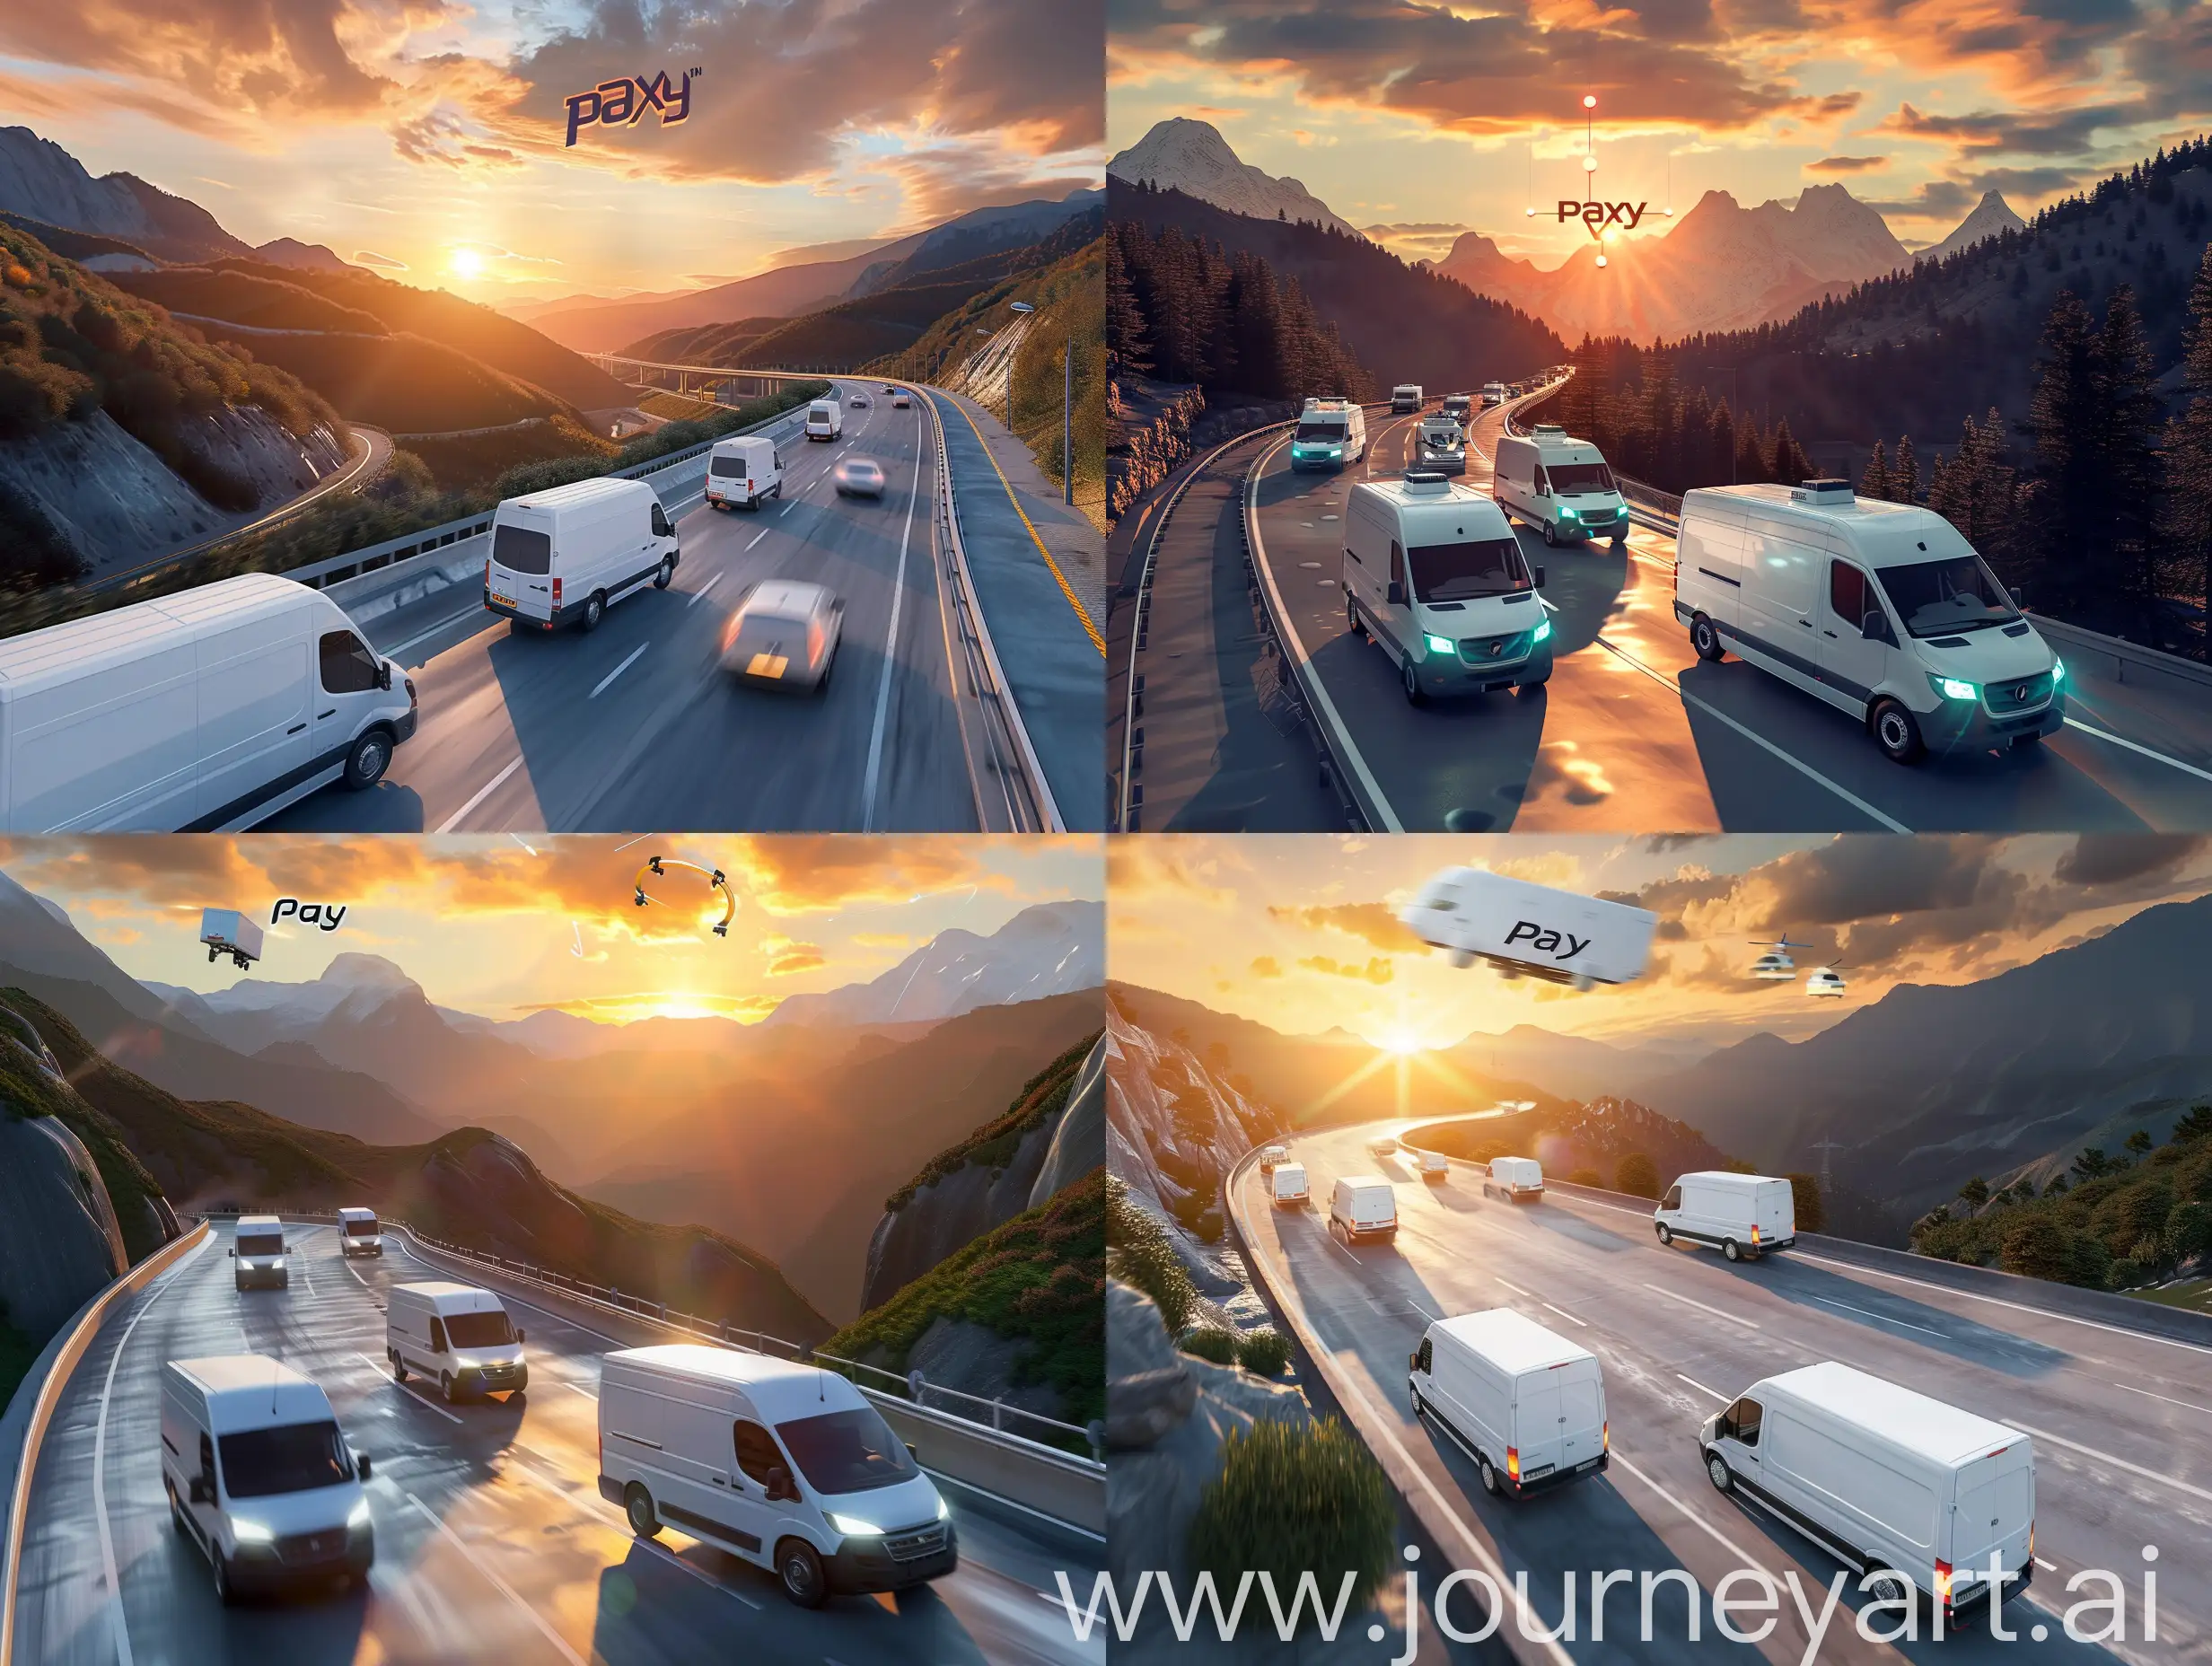 Paxy-Delivery-Vans-Racing-through-Mountain-Valleys-at-Sunset